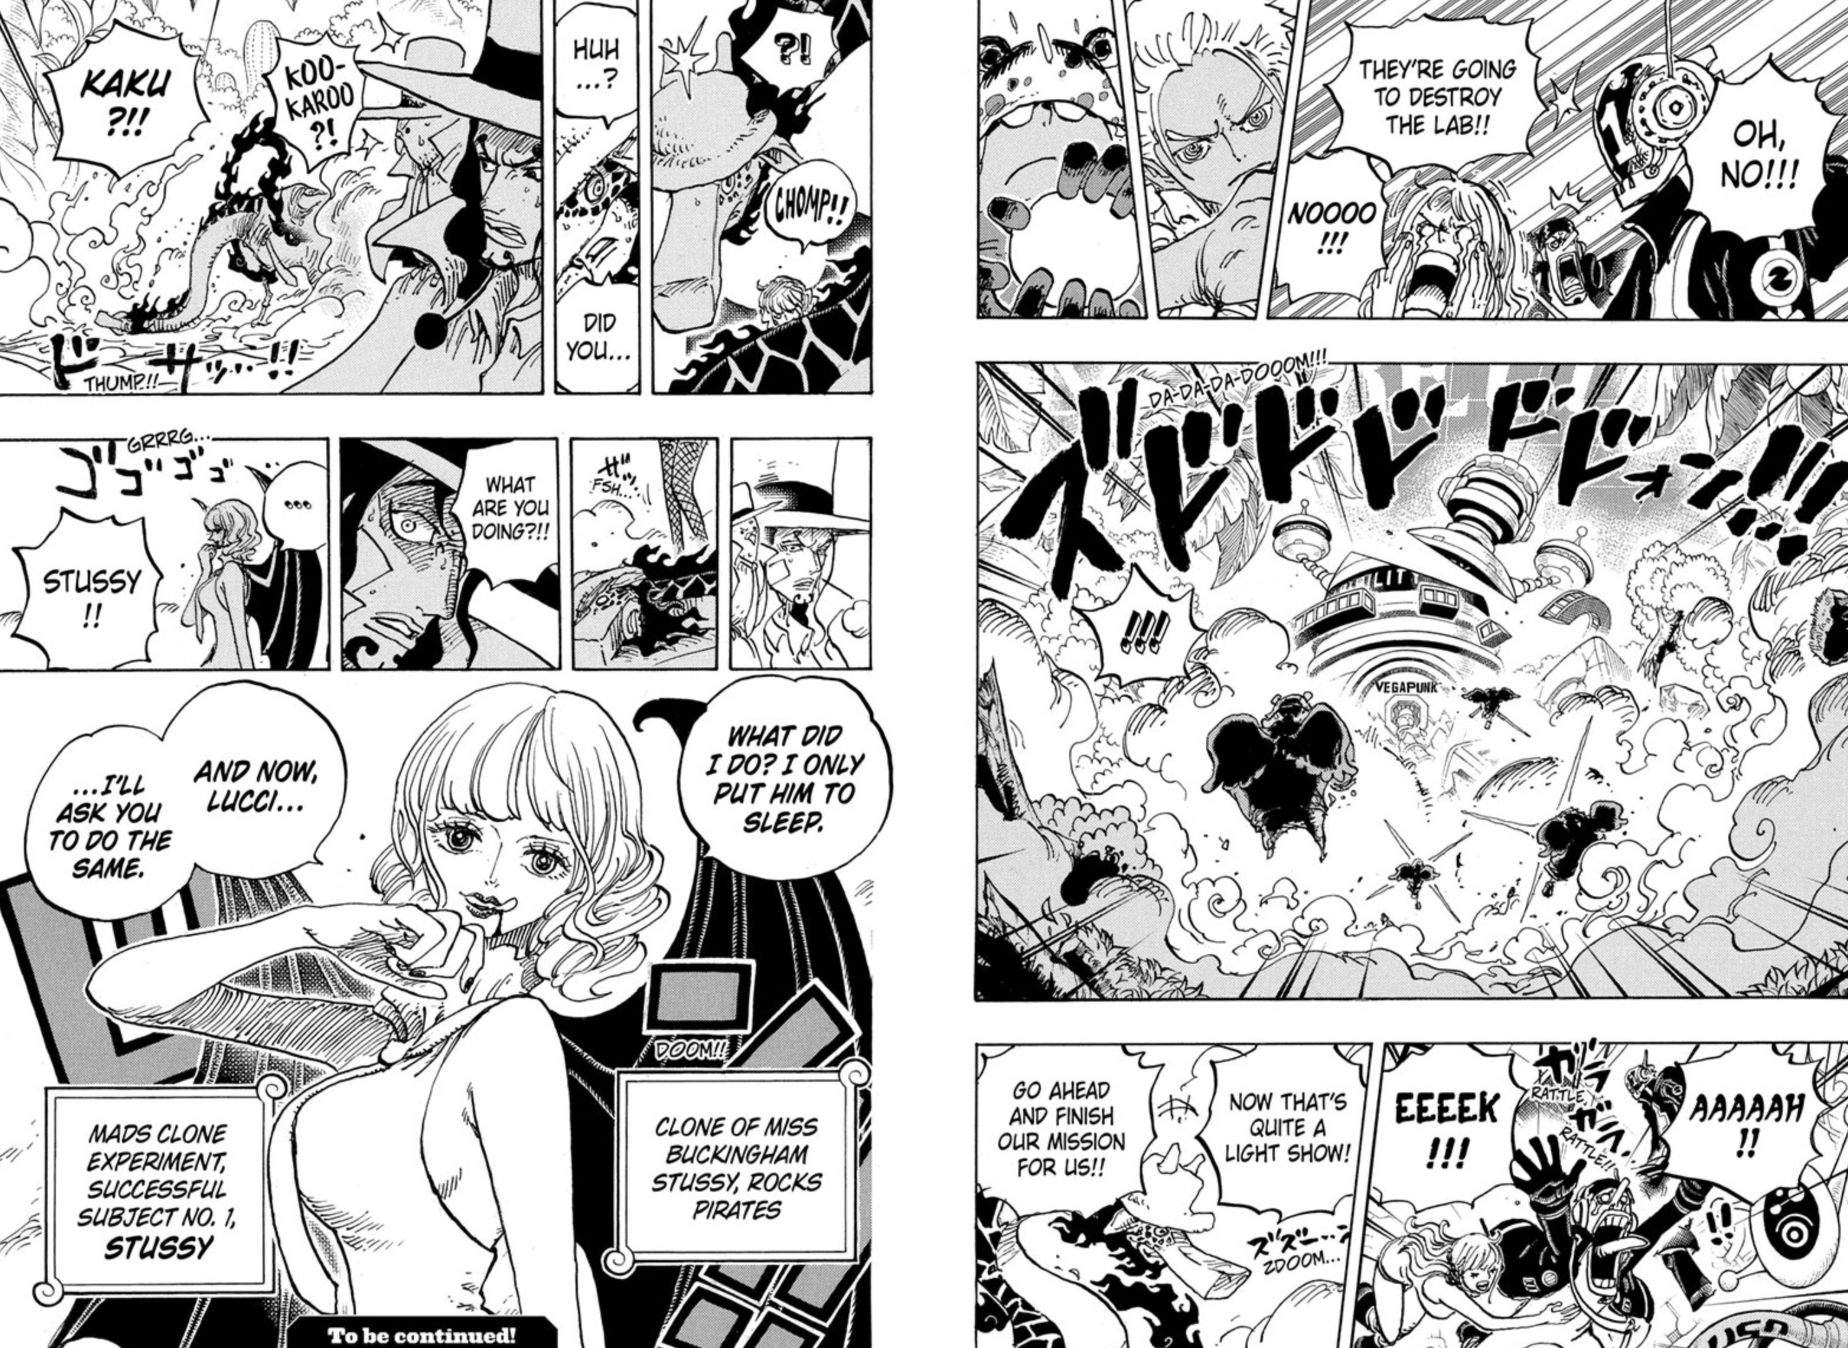 One Piece Chapter 1072 Pages 16-17